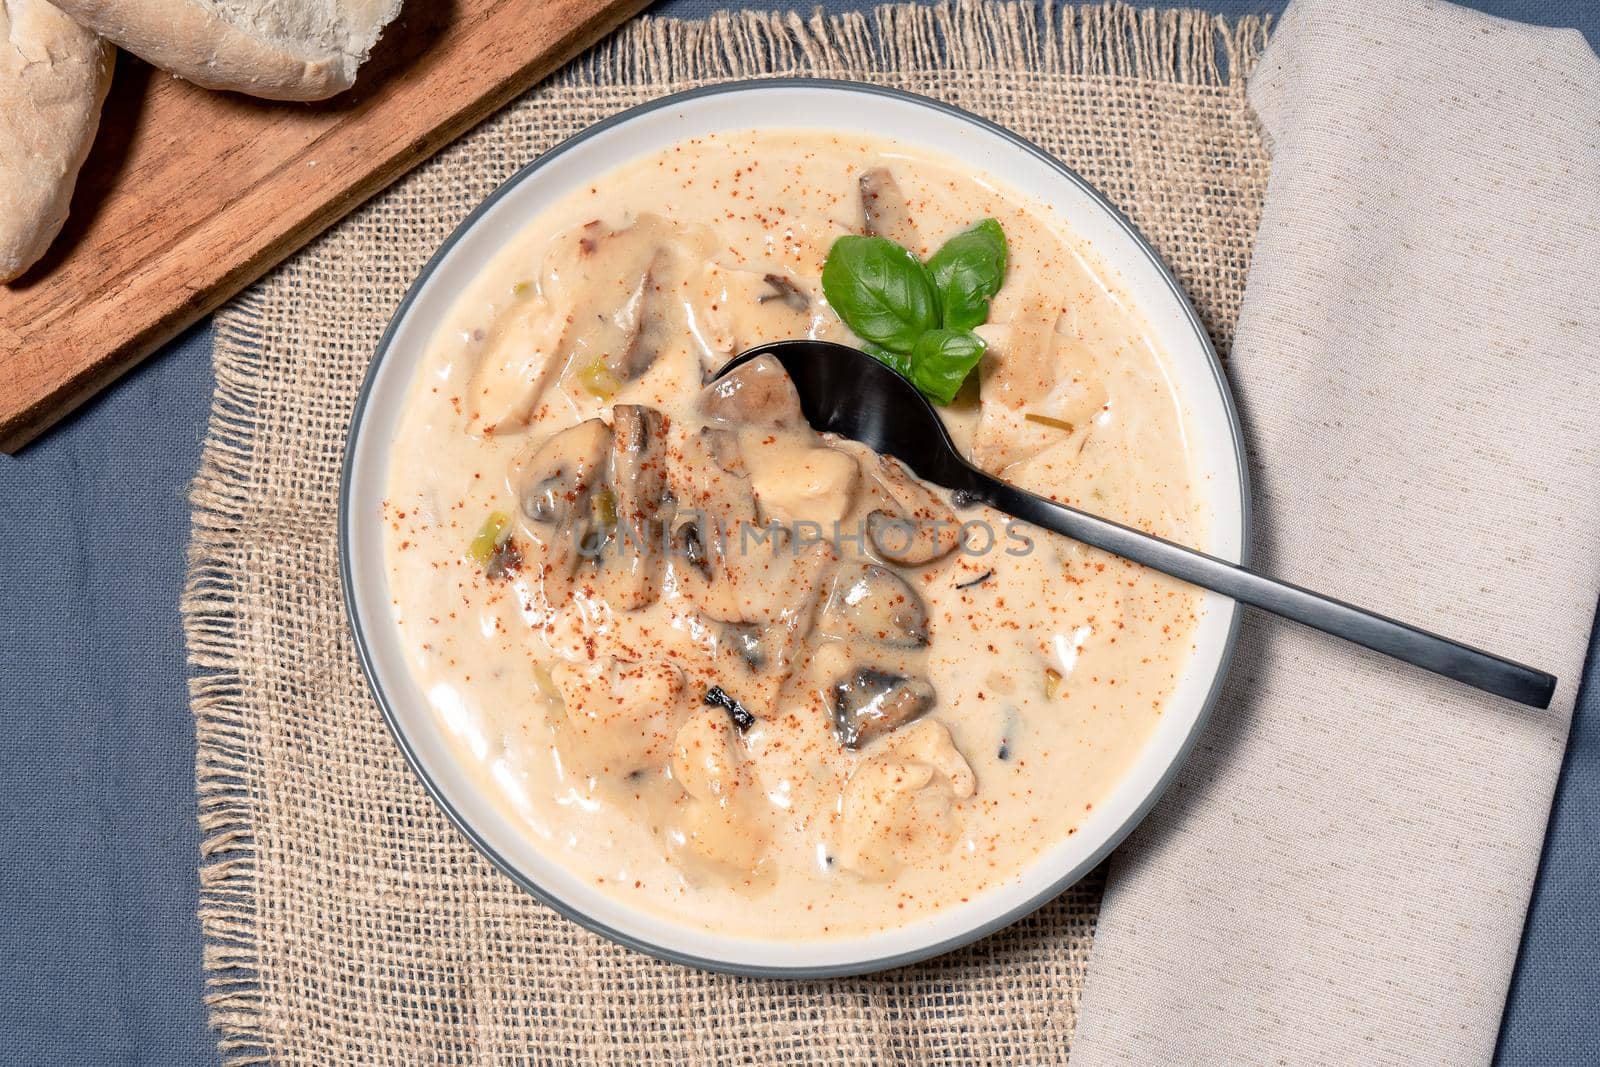 A Homemade cream of chicken and mushroom soup or French style chicken fricassee, in a soup bowl on a wooden table. Aerial view